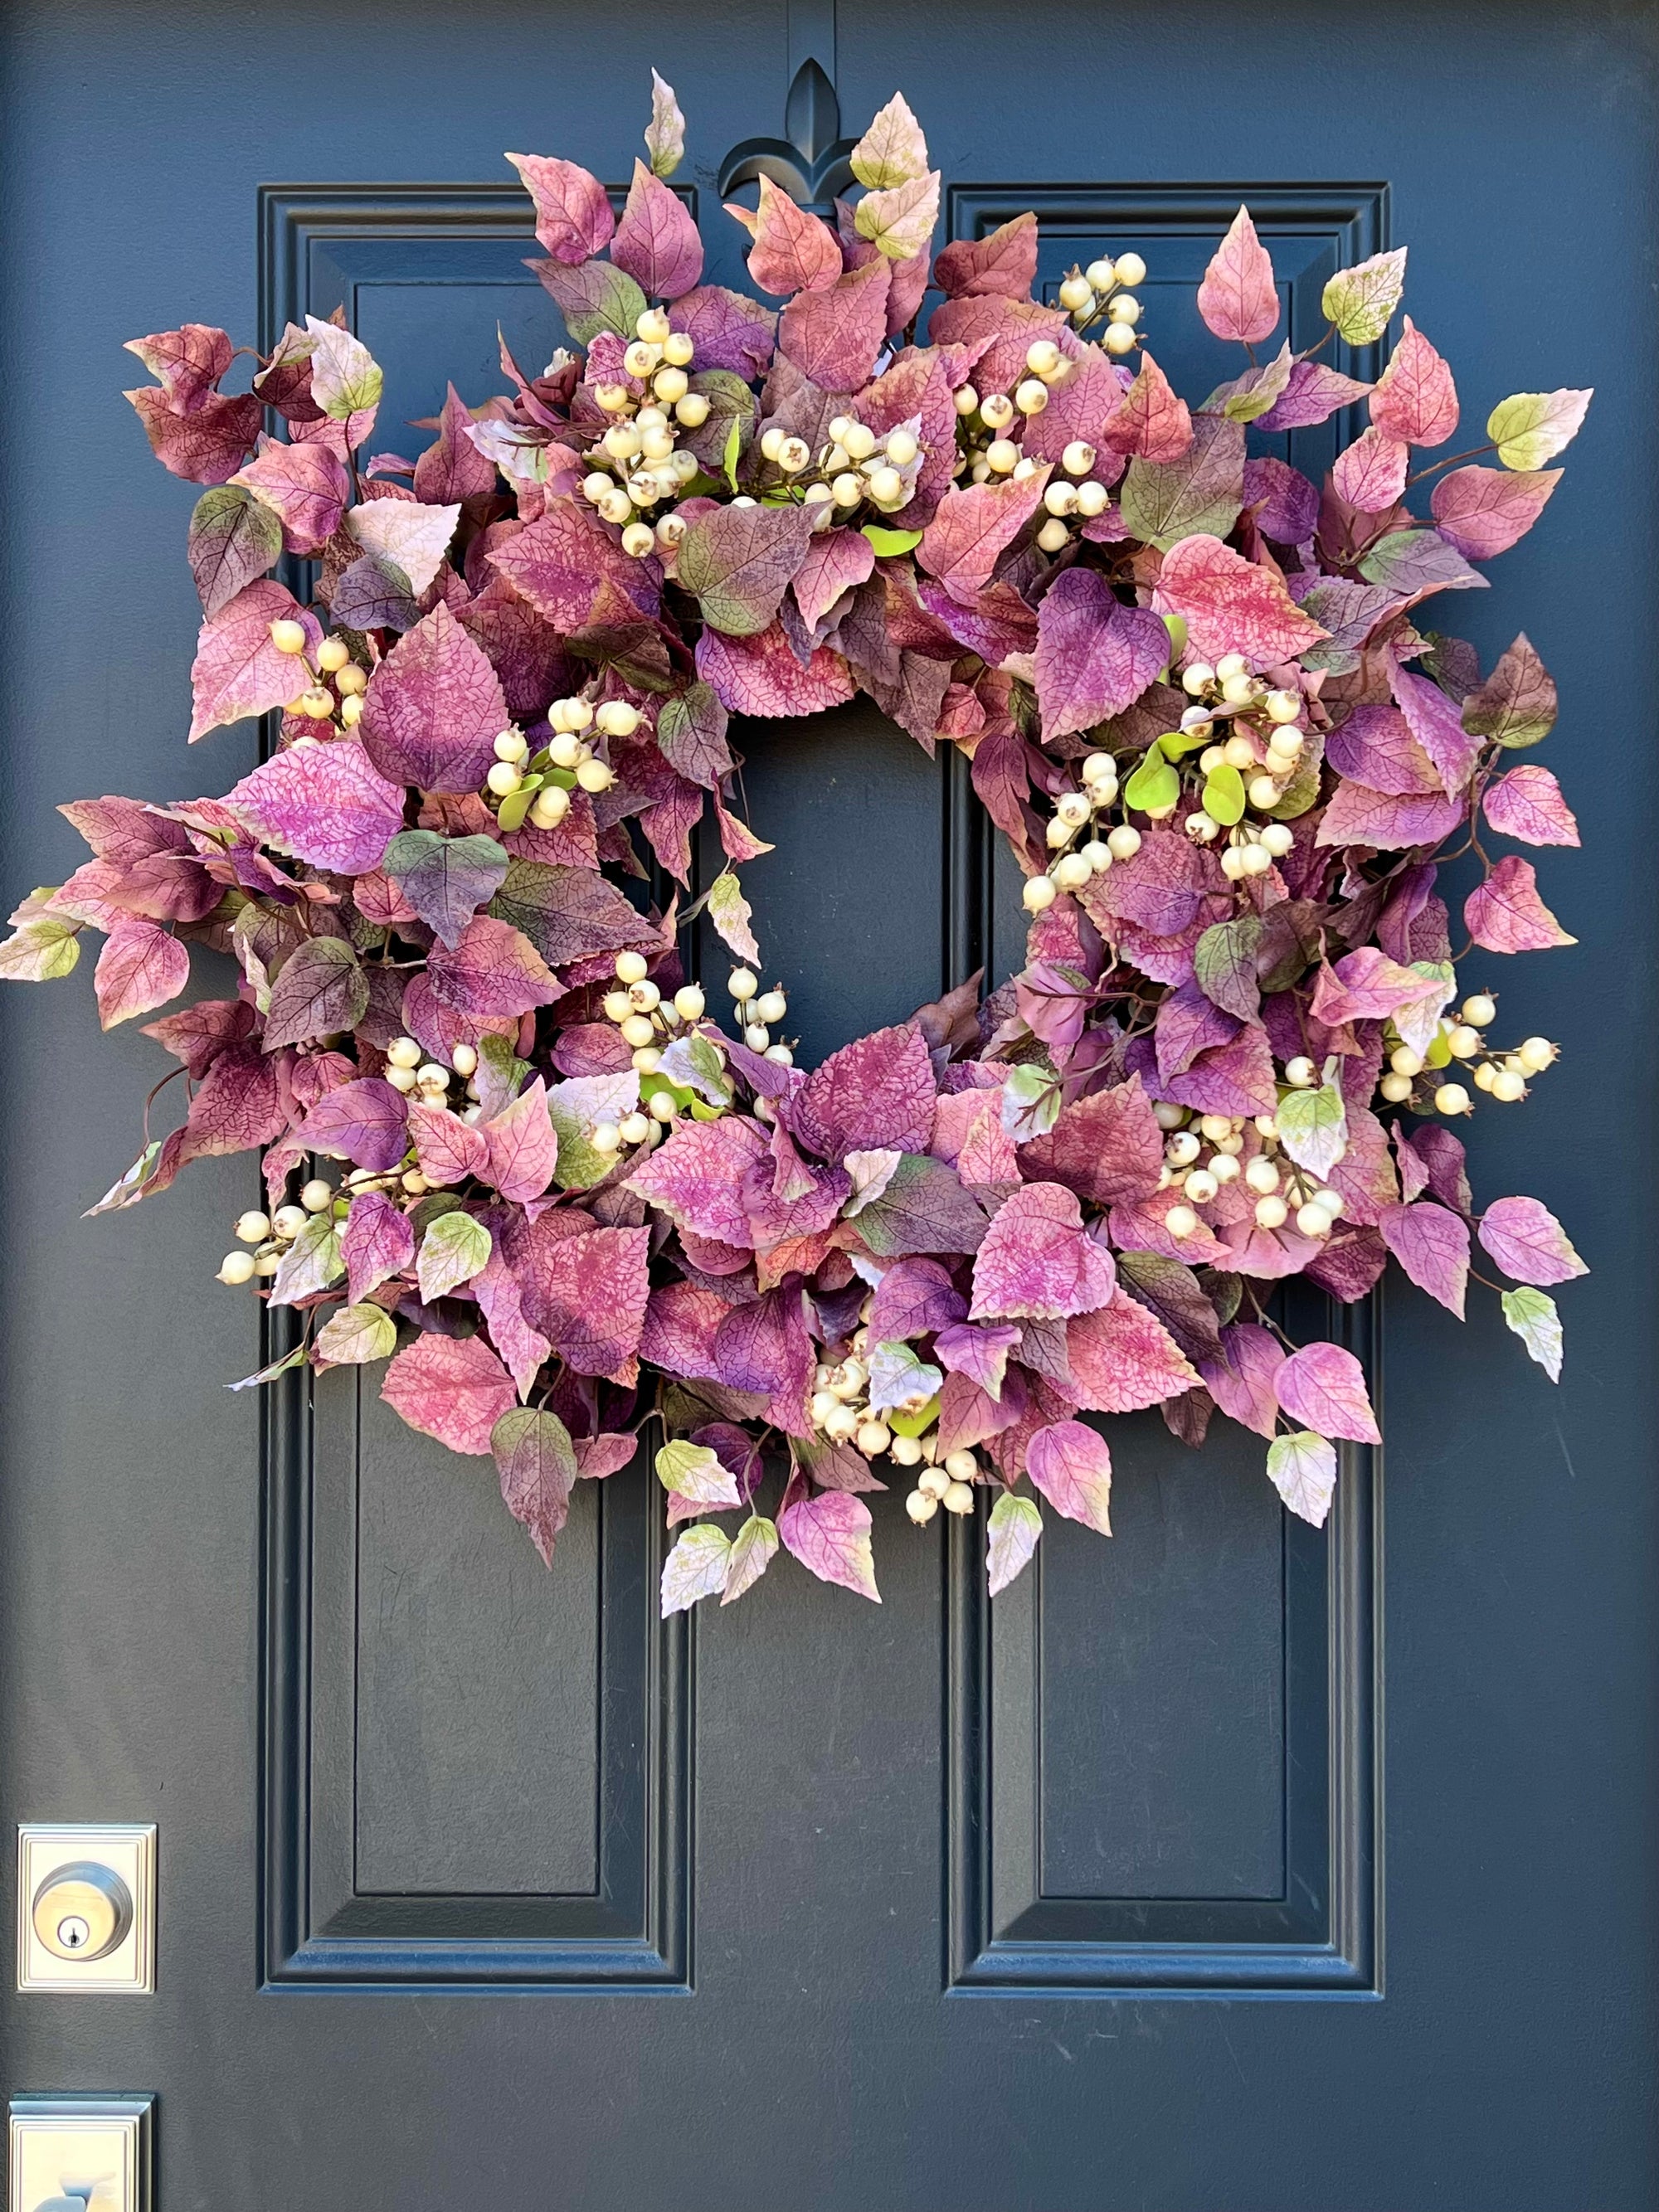 Fall Wreath with Purple Leaves and White Berry Clusters